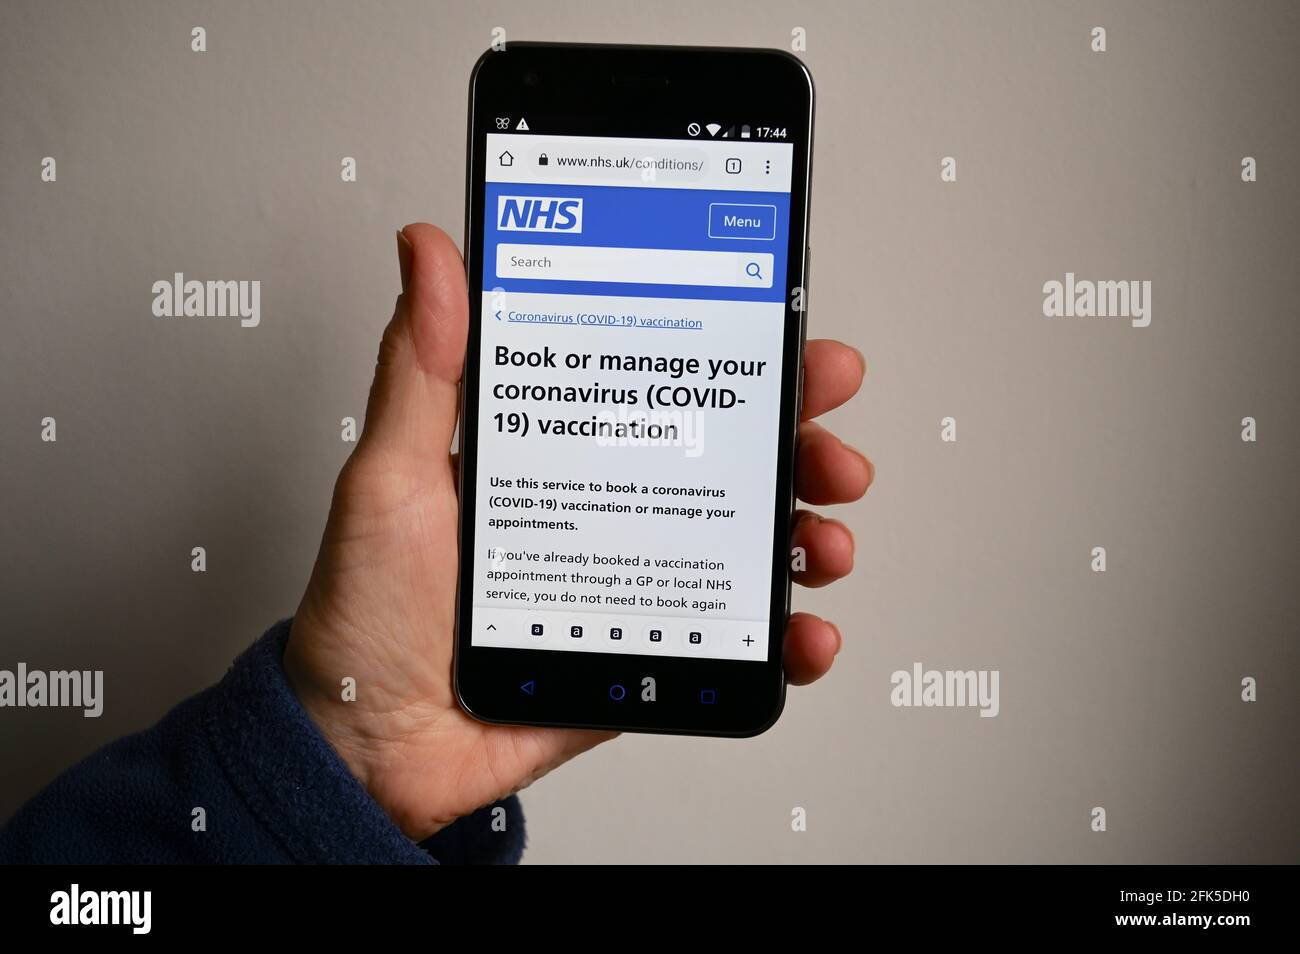 Coronavirus (COVID-19) vaccination NHS Website shown on a mobile phone screen. Stock Photo